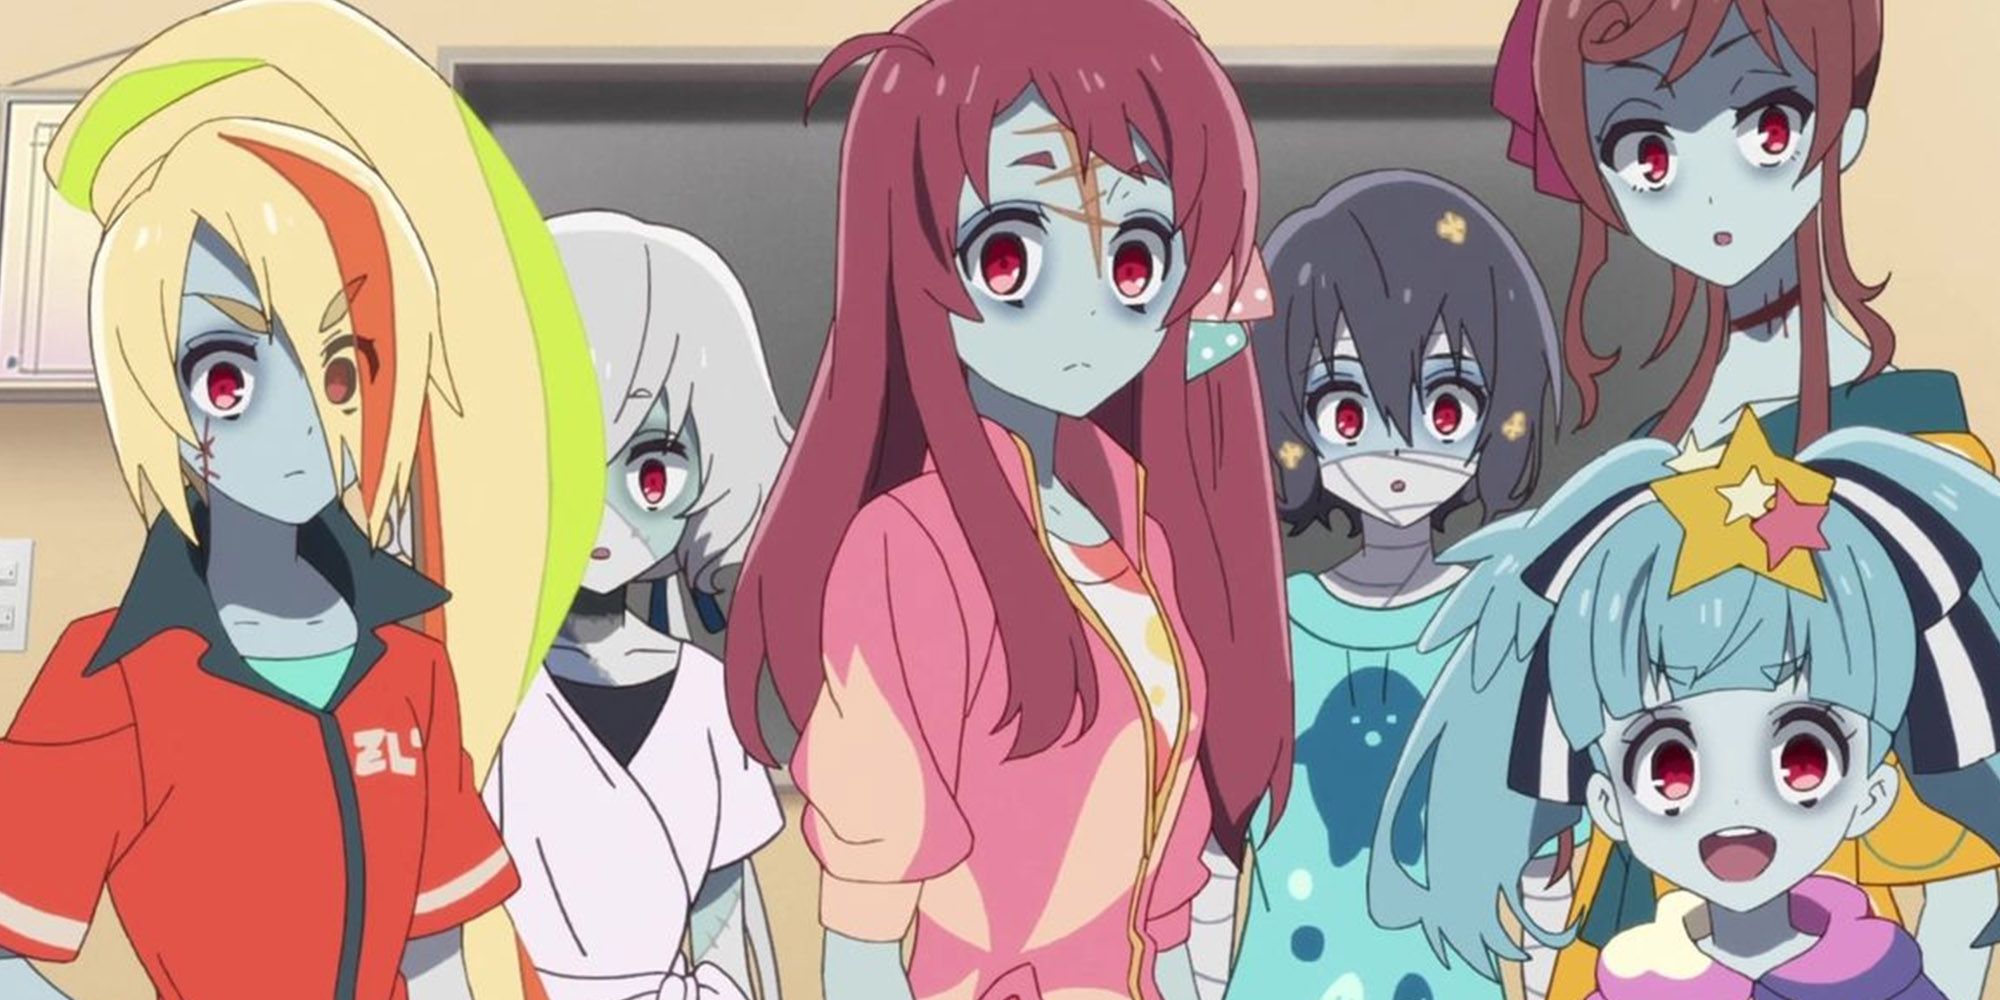 Zombieland Saga -Cast Of Girls All In Their True Zombie Apperances